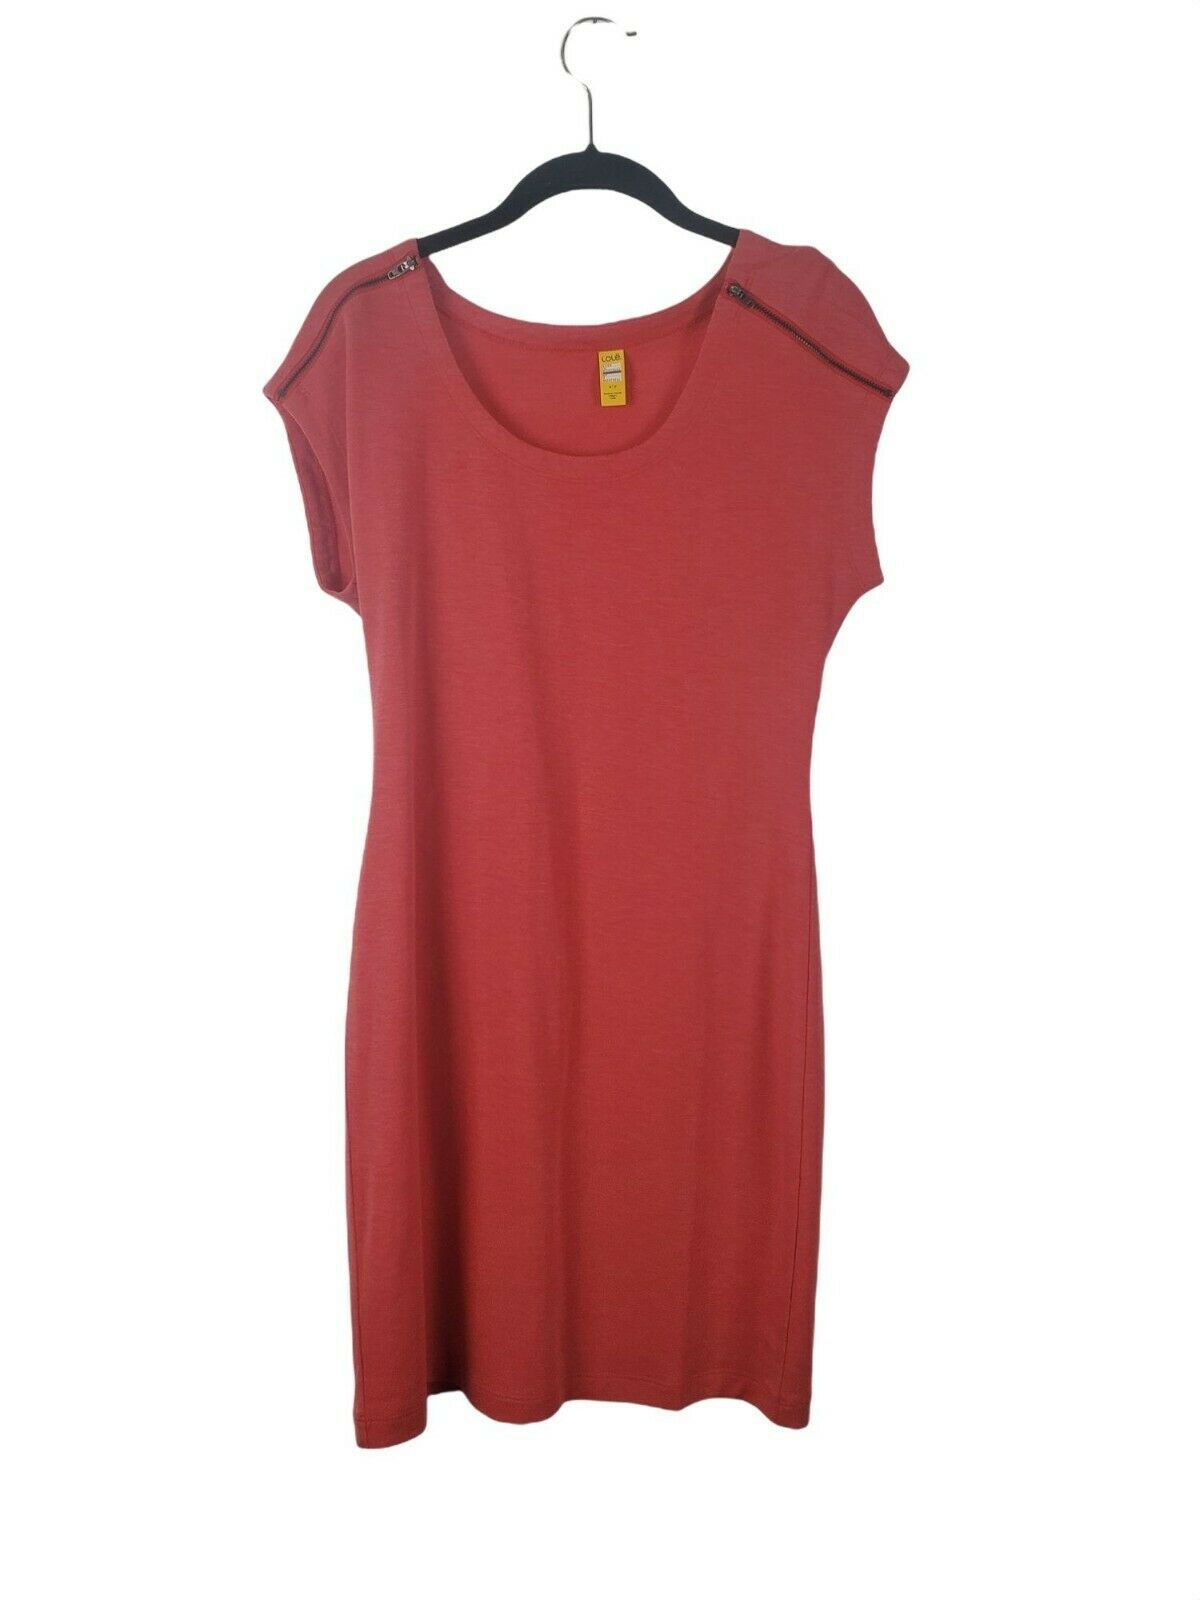 Primary image for Lole Dress Womens S/P Red Knee Length Cap Sleeve Crew Neck Summer